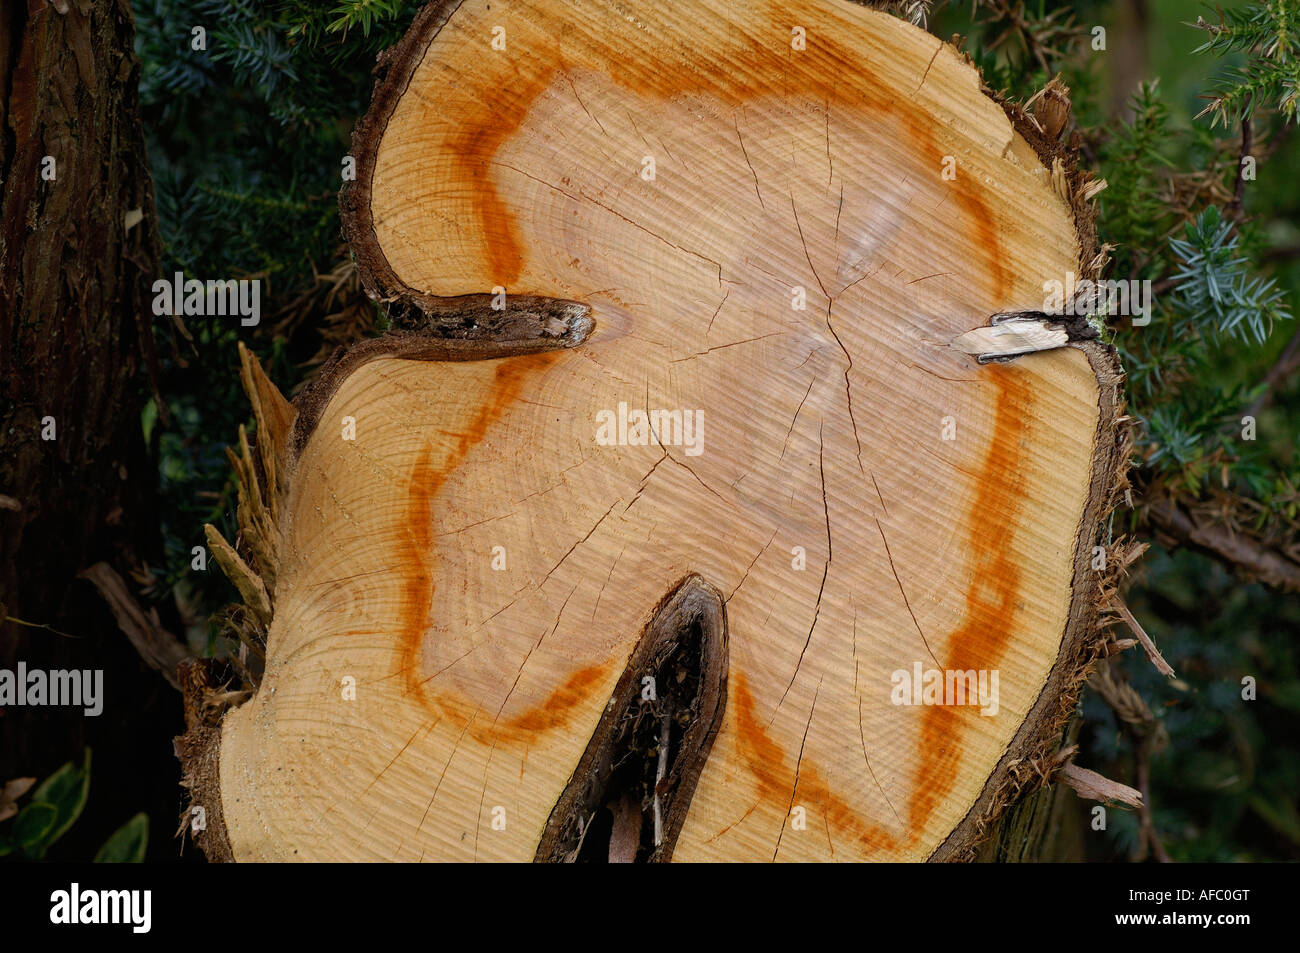 Cross section of main stem of 200 year old yew tree Stock Photo